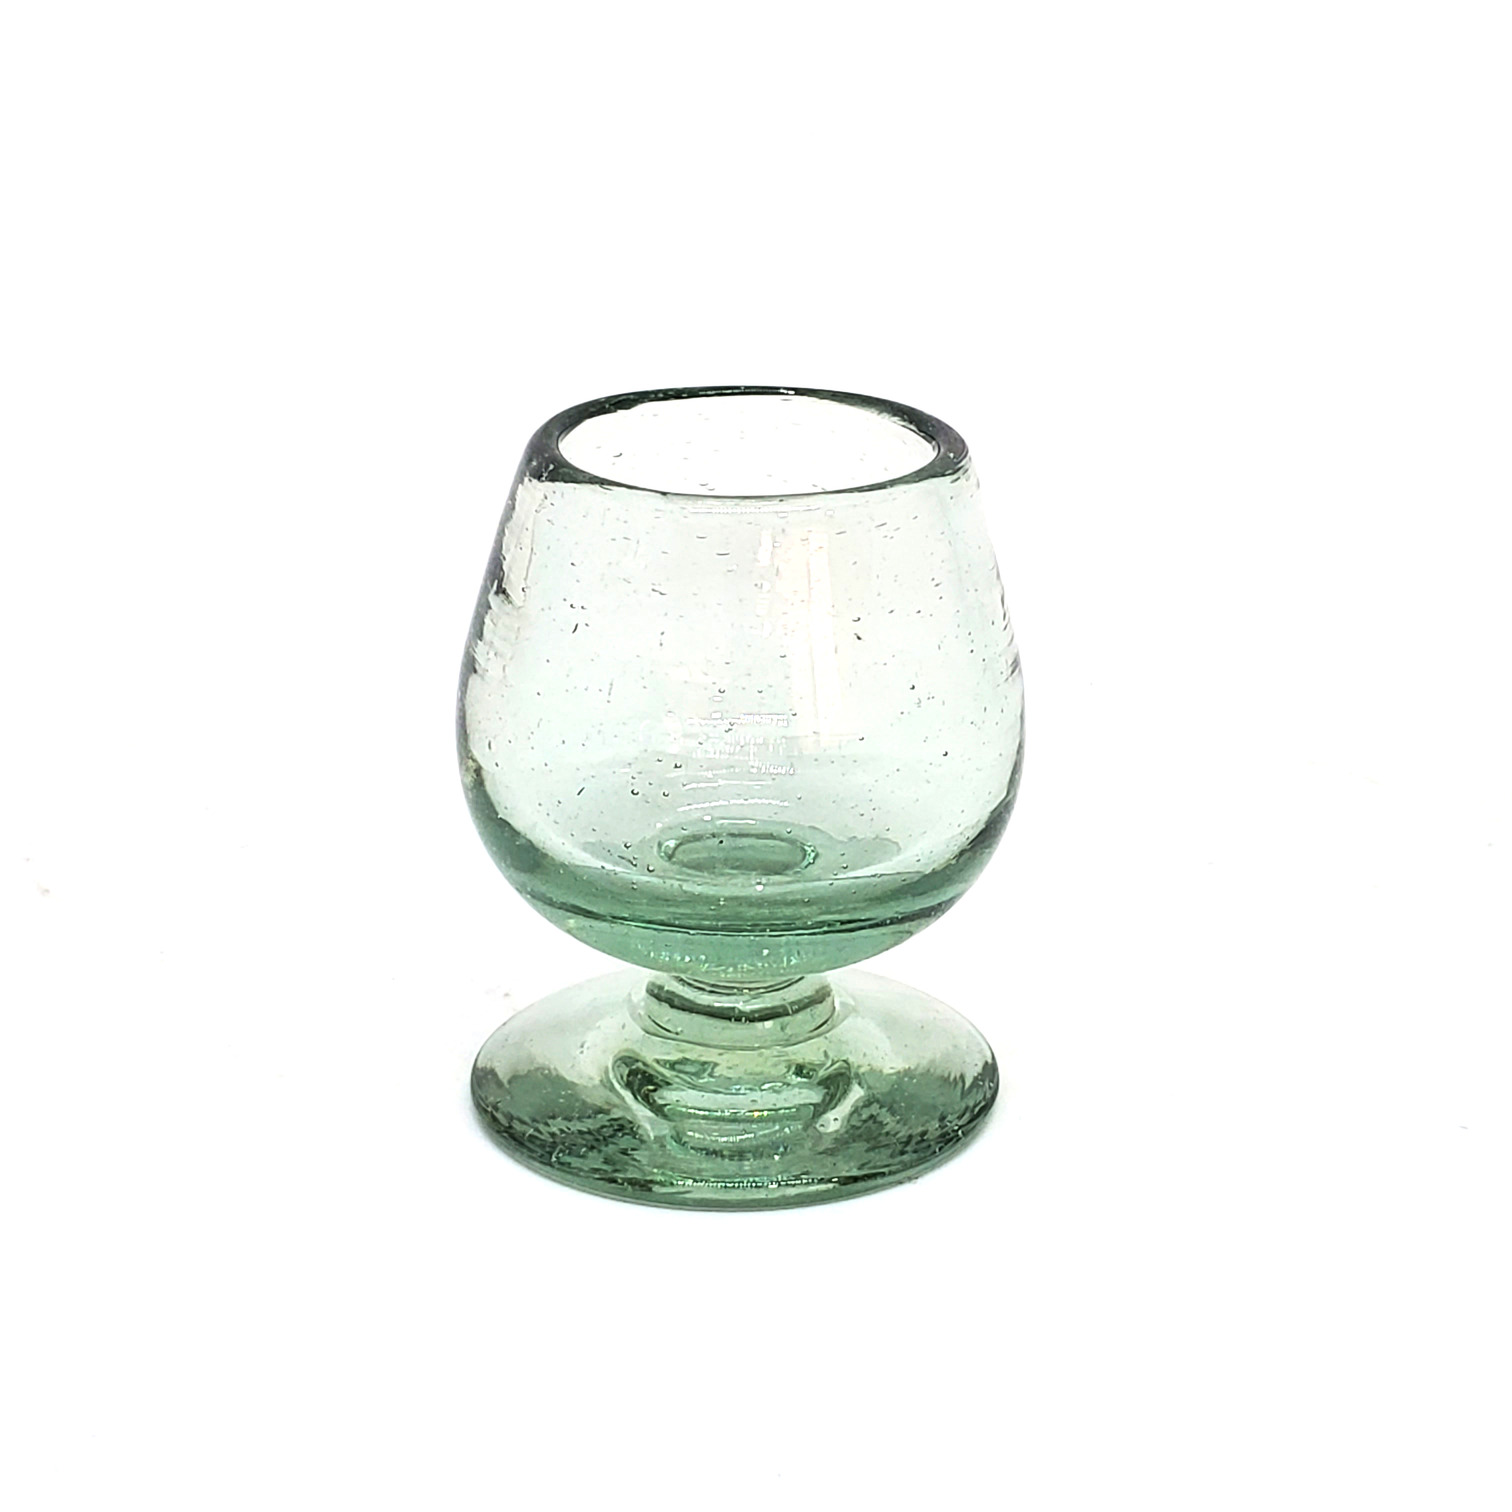 Tequila Shot Glasses / Clear Tequila Sippers (set of 6) / Sip your favourite tequila or mezcal with these iconic clear handcrafted sipping glasses. You may also serve lemon juice or other chasers.